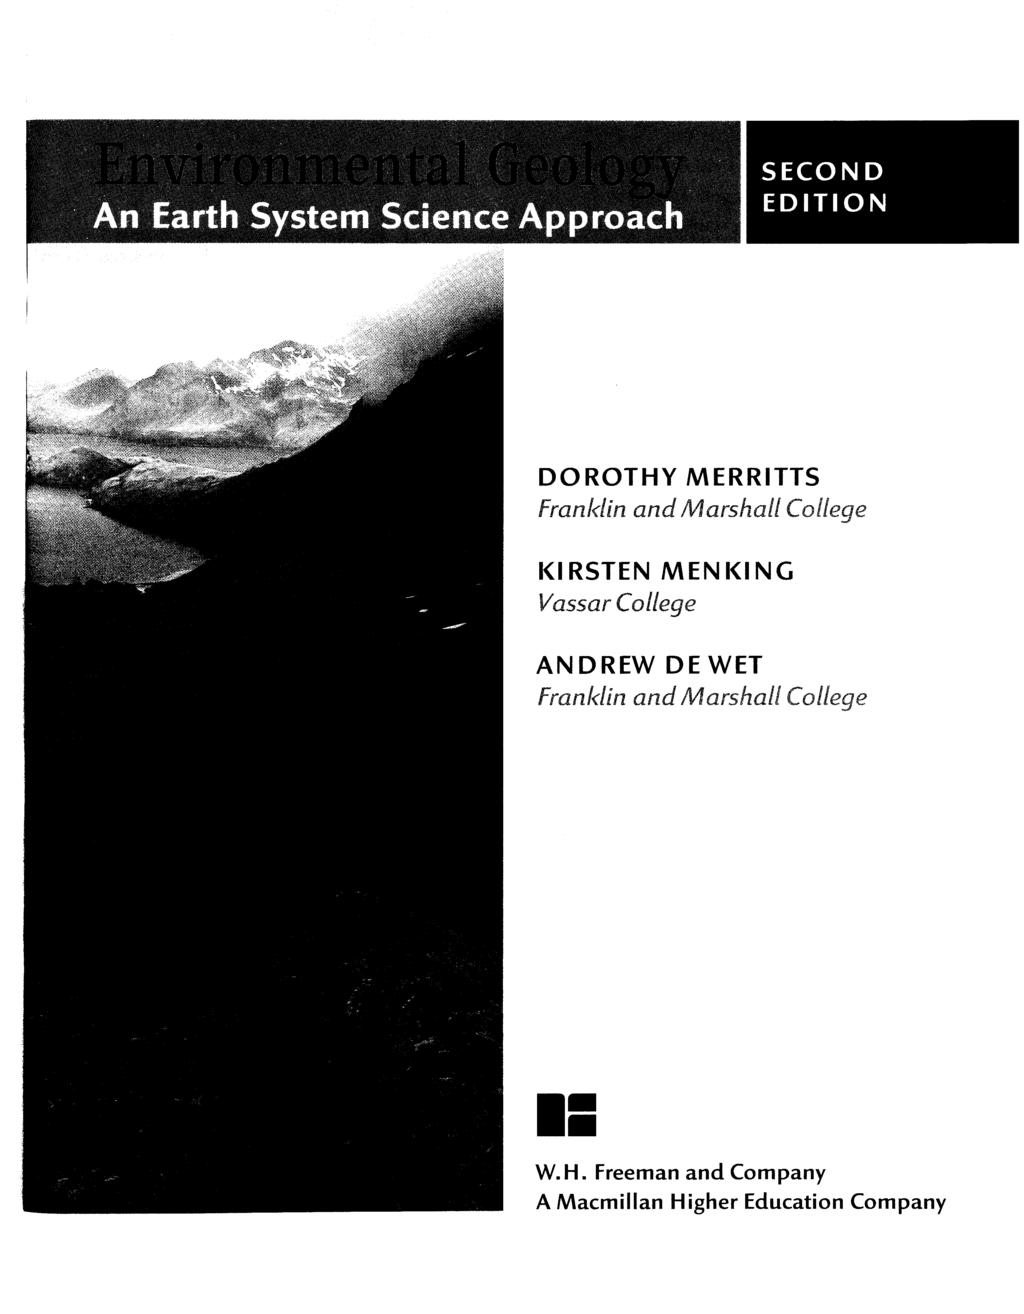 An Earth System Science Approach SECOND EDITION DOROTHY MERRITTS Franklin and Marshall College KIRSTEN MENKING